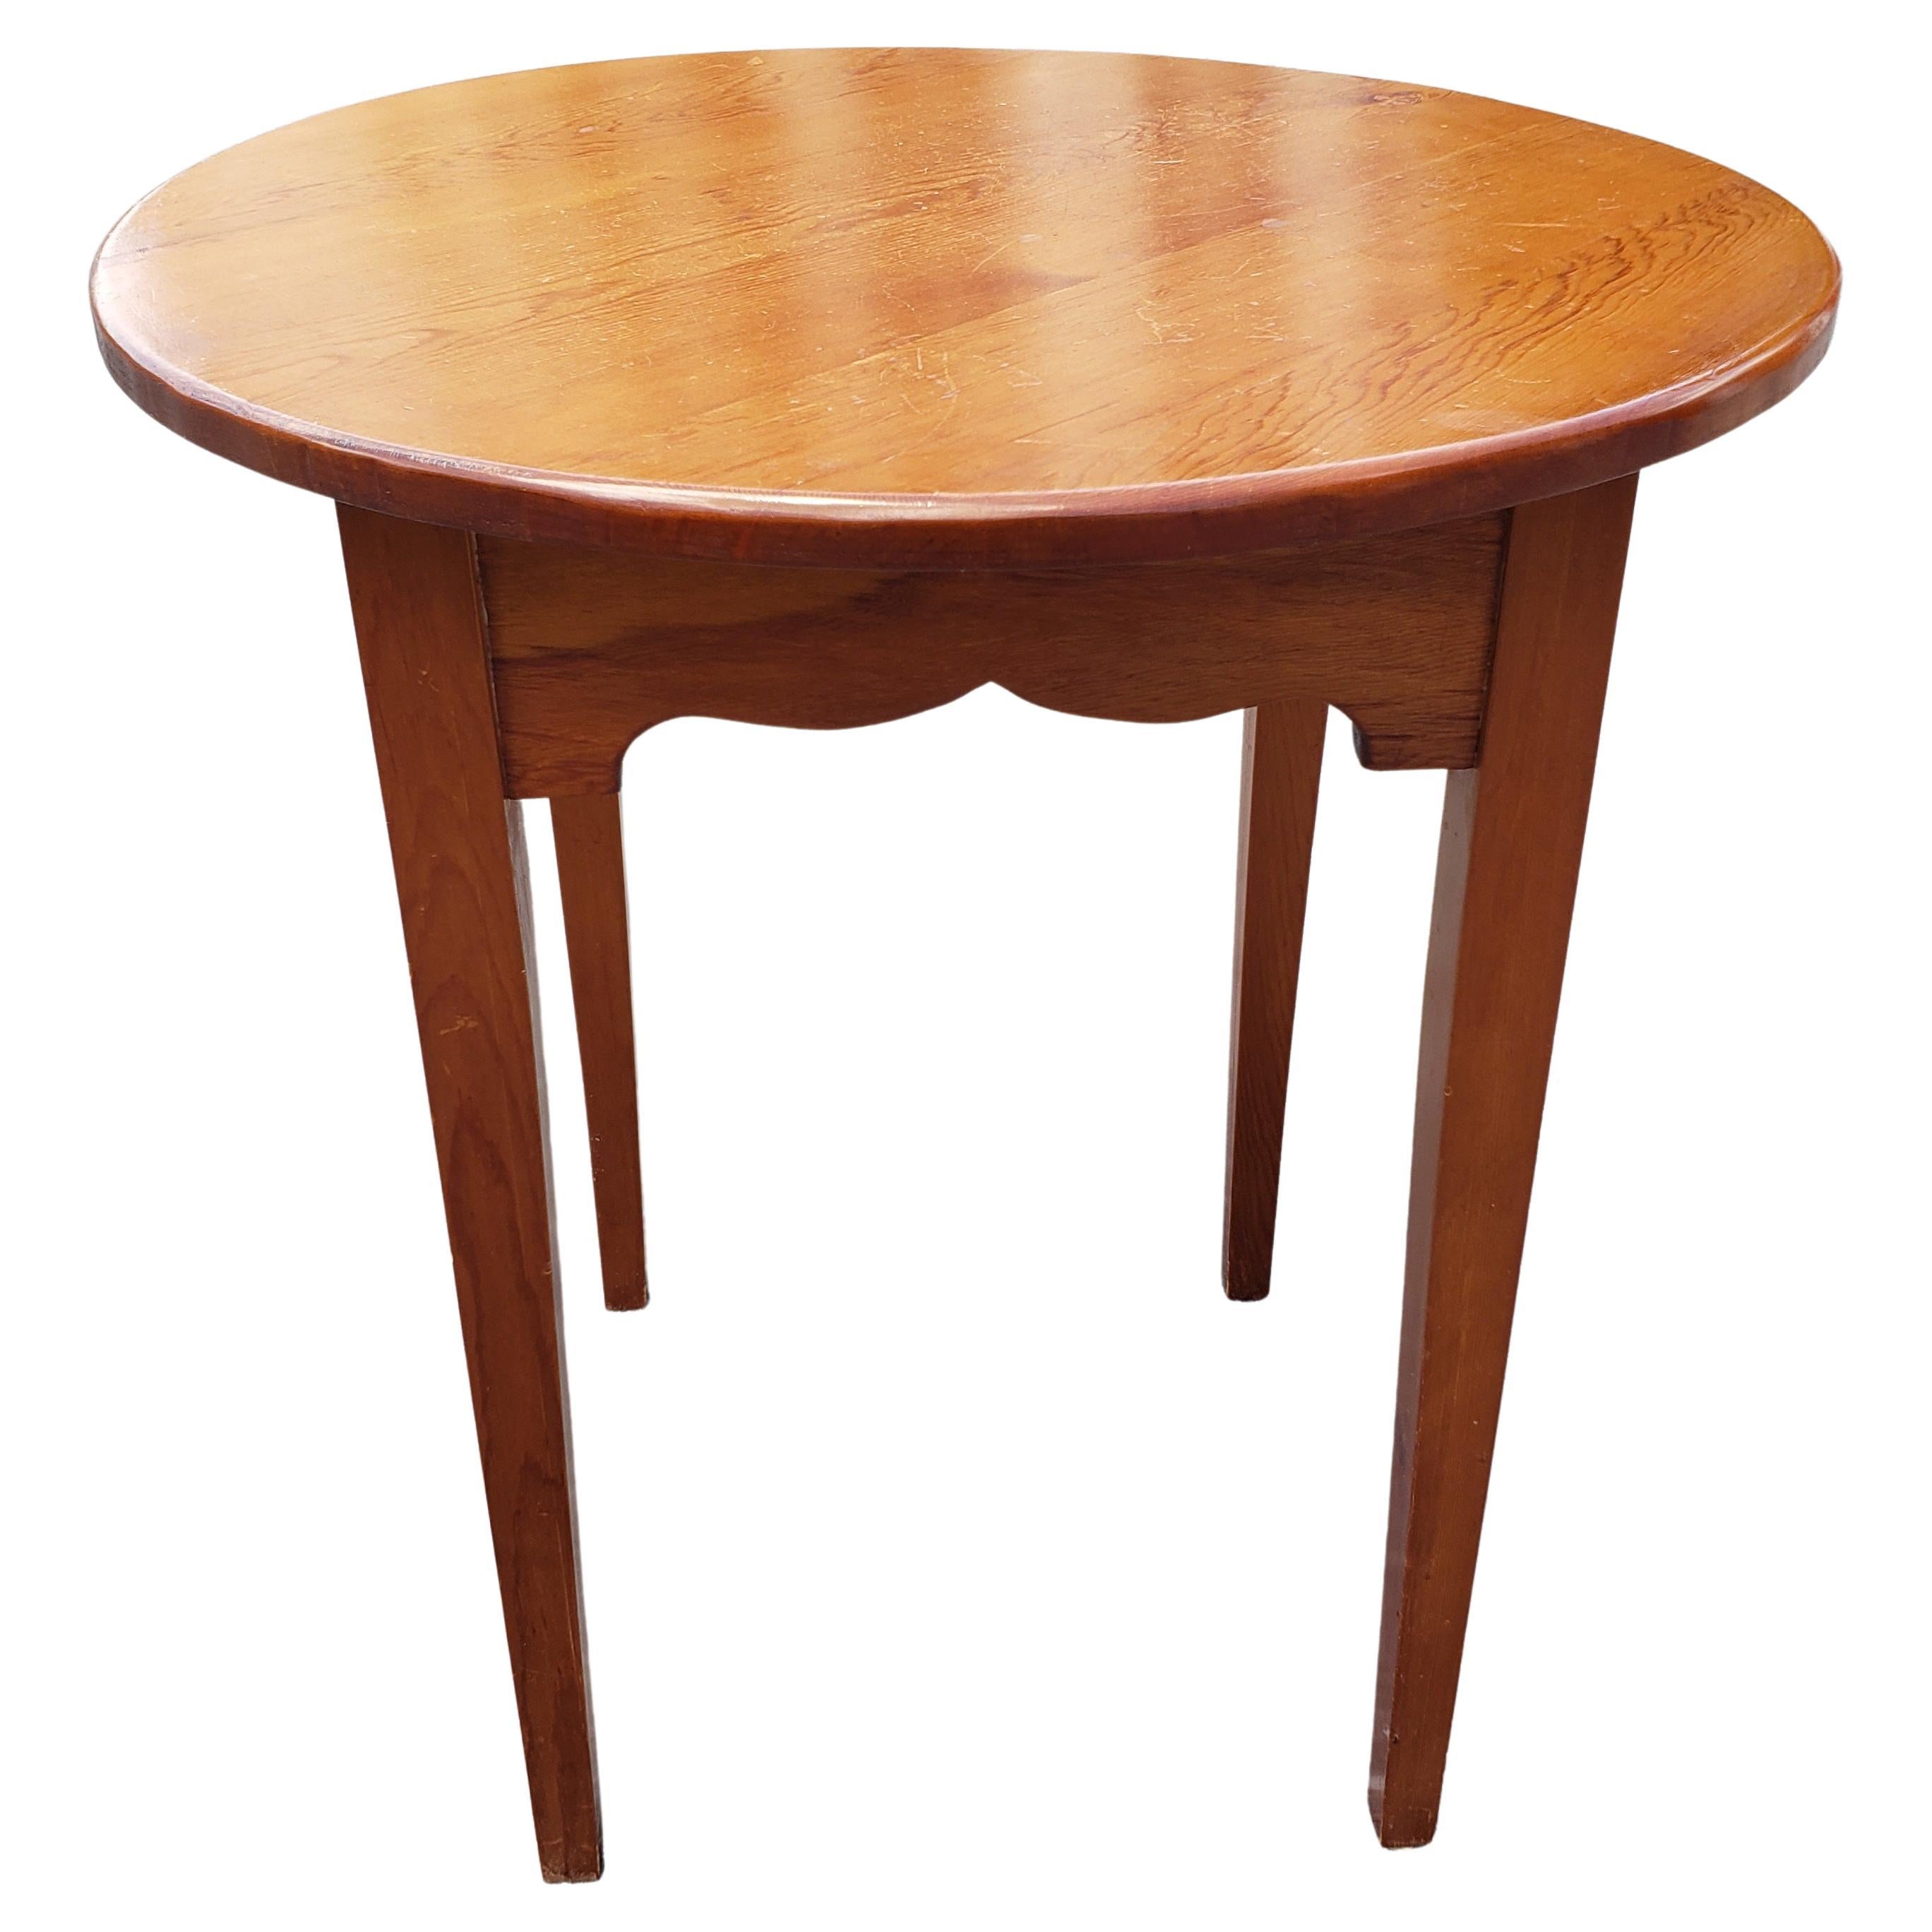 Amish Hand-Crafted Pine Round Lamp Table For Sale